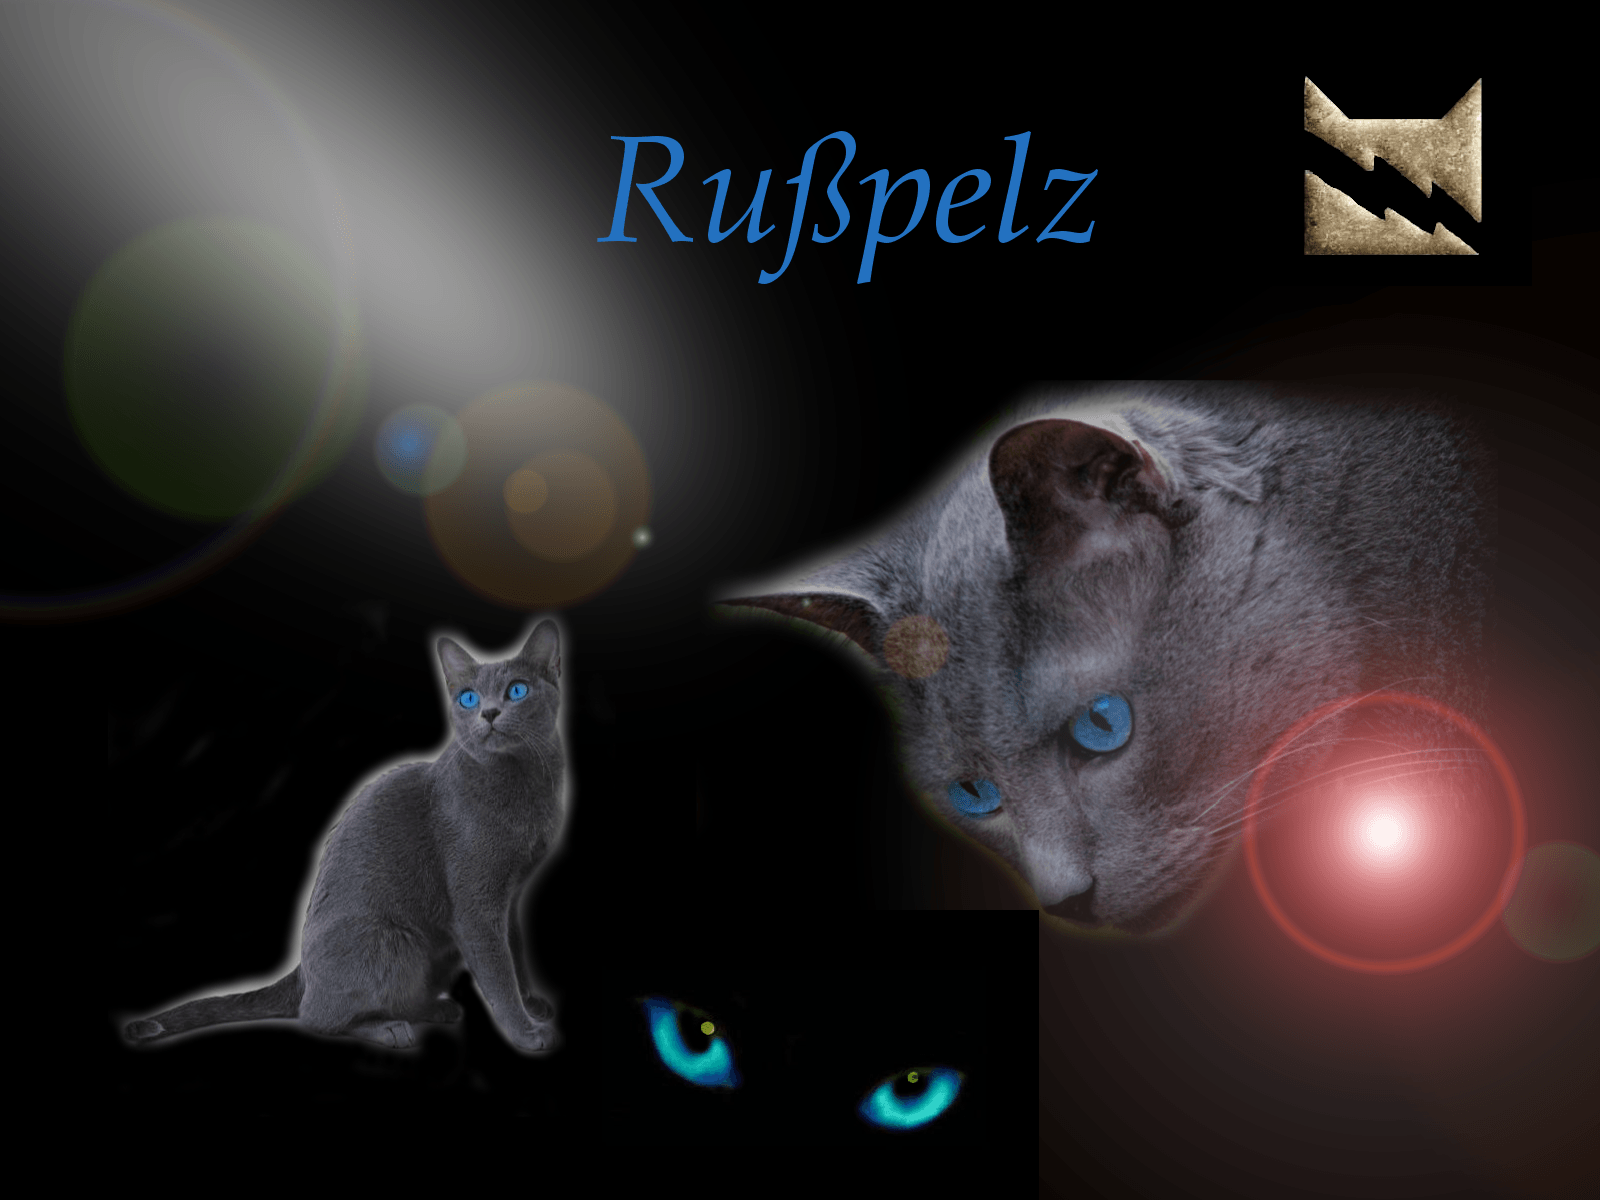 Wallpaper.wiki Warrior Cats Background PIC WPE00240